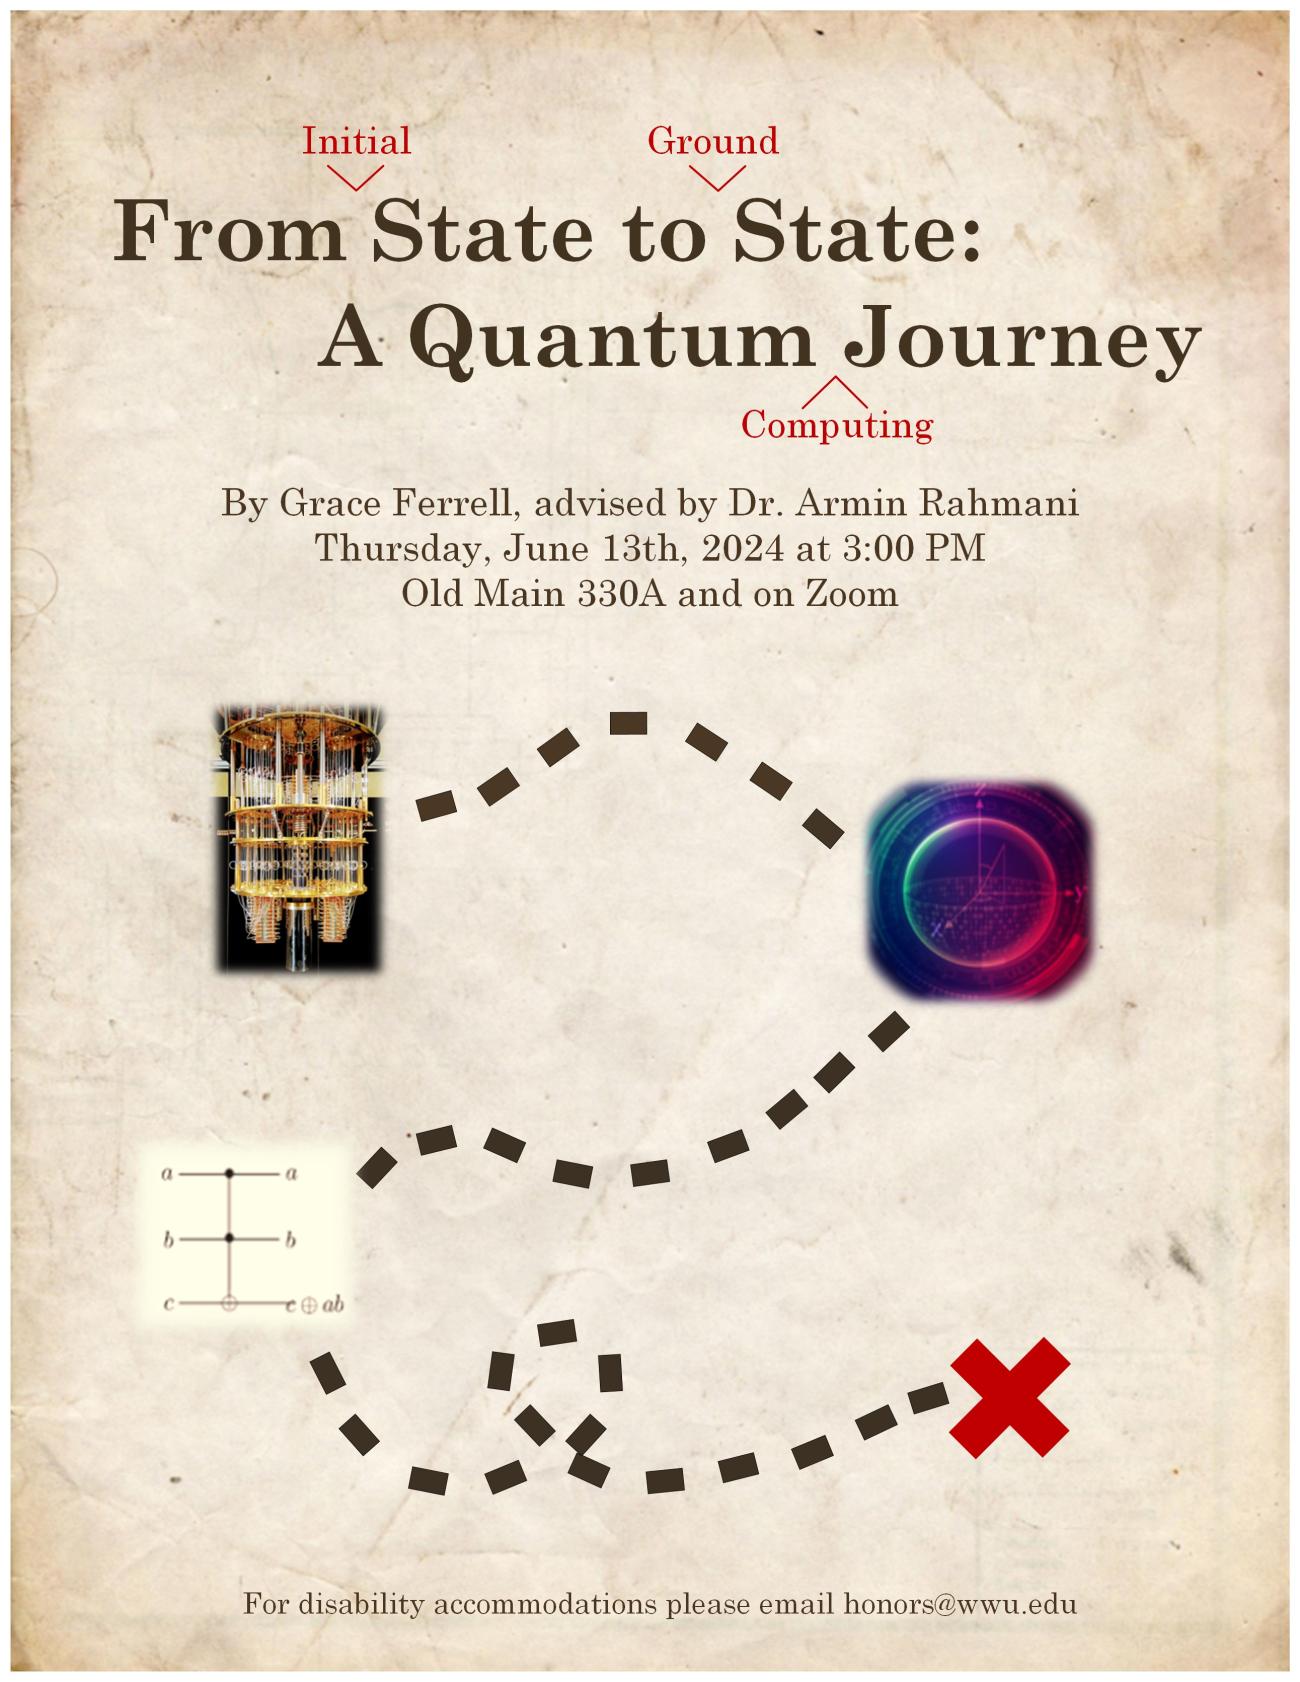 Poster formatted to look like an old map with dashed lines connecting images of a quantum computer, qubit, and a mathematical representation of a quantum gate that lead to a red x.  Text reads “From Initial State to Ground State: A Quantum Computing Journey.  By Grace Ferrell, advised by Dr. Armin Rahmani.  Thursday, June 13th, 2024.  3:00 PM.  Old Main 330A and on Zoom.  For disability accommodations please email honors@wwu.edu.”